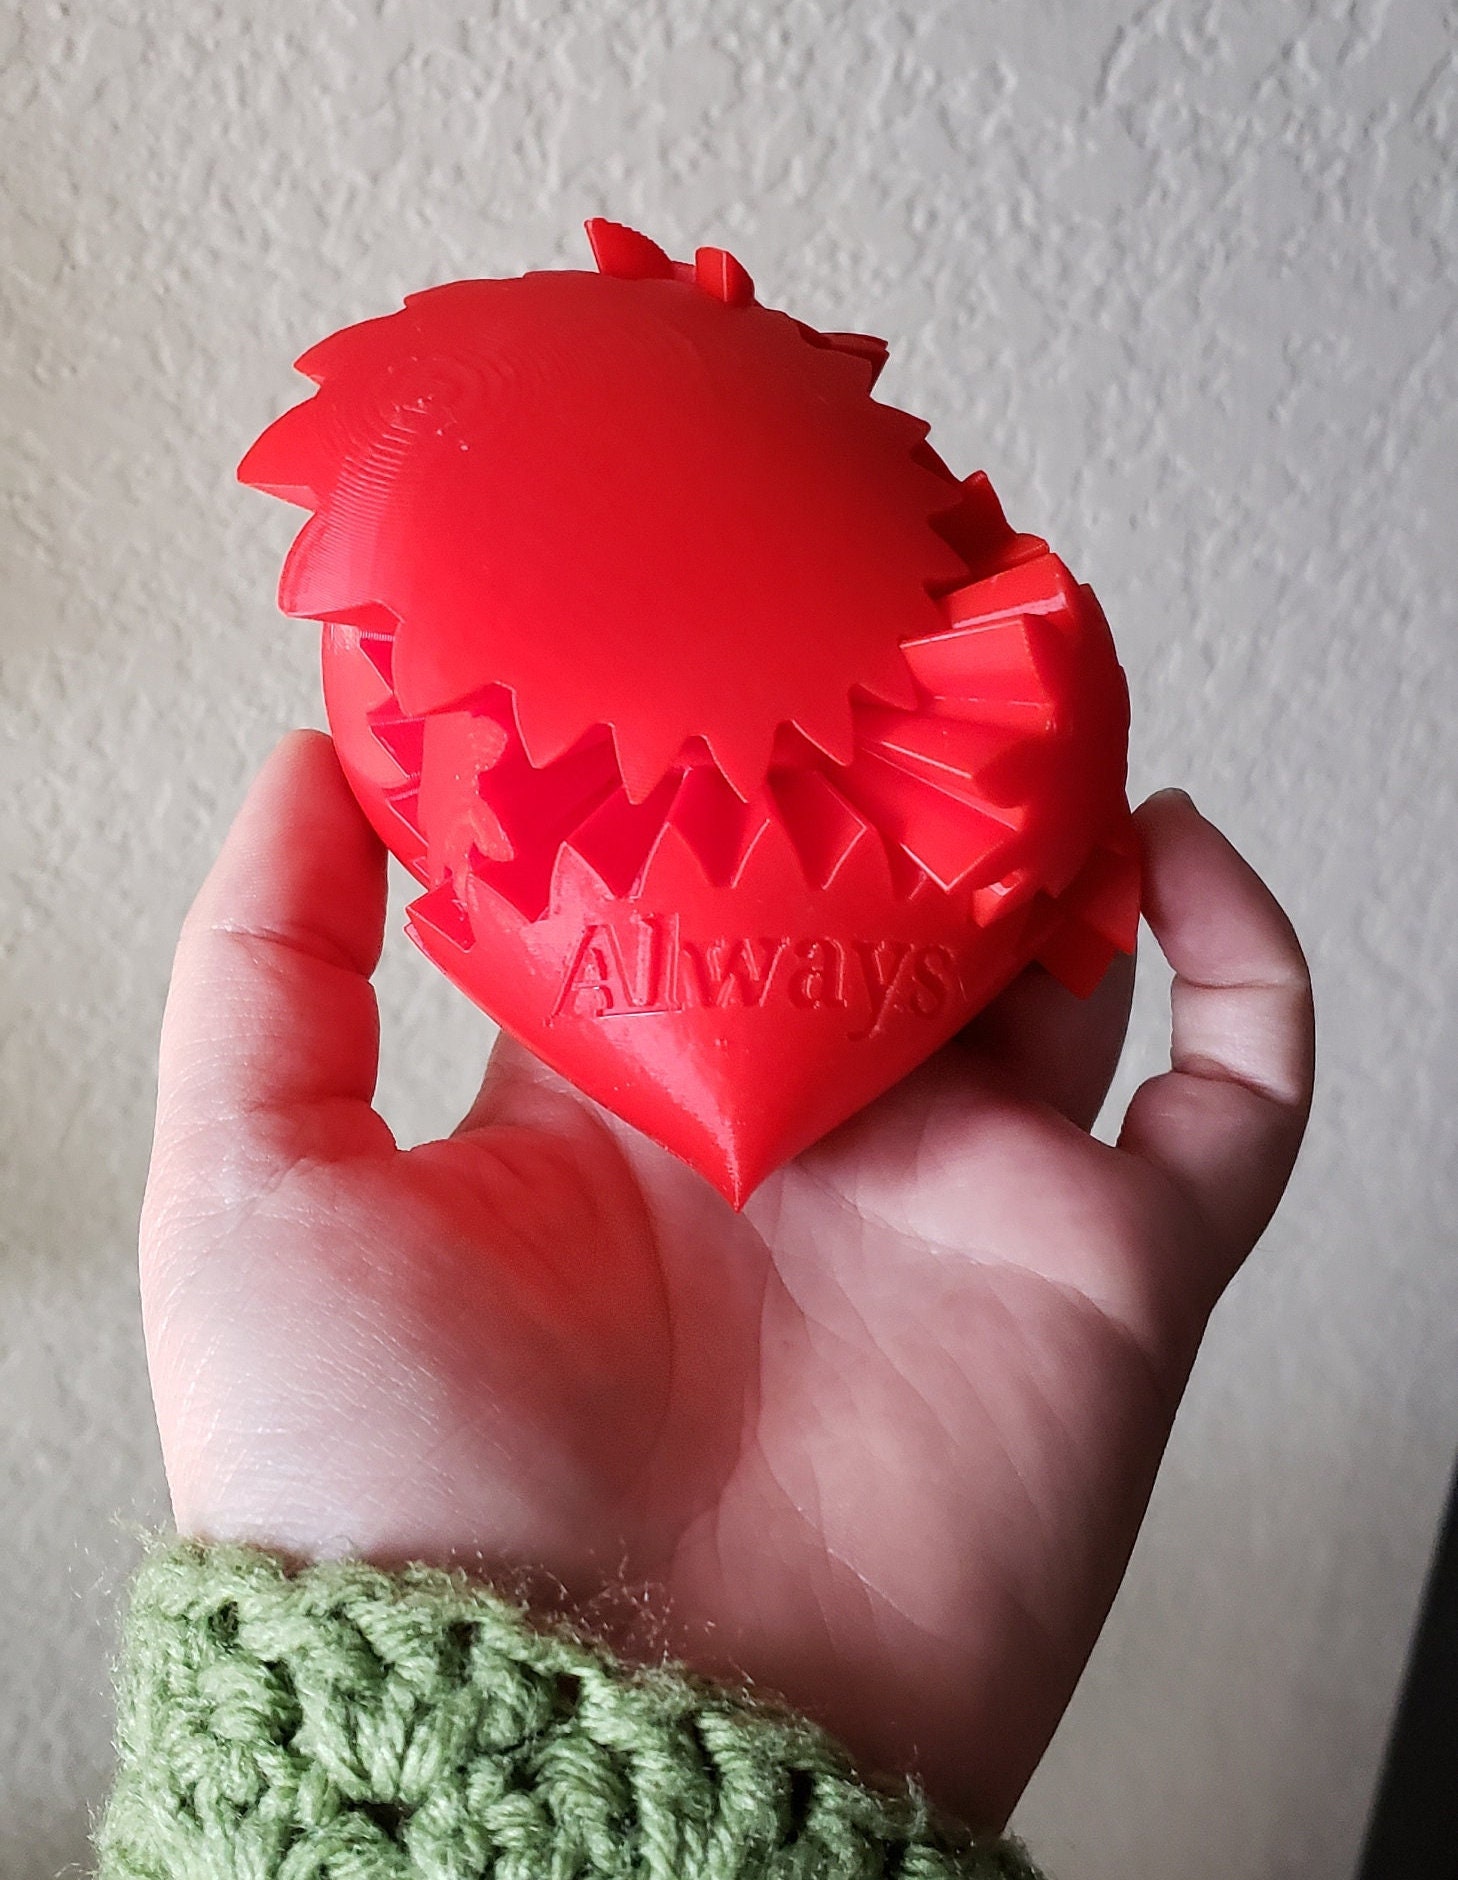 Unique Large Custom Multi Colored 3D Printed Steampunk Moving Gear Heart Gift 